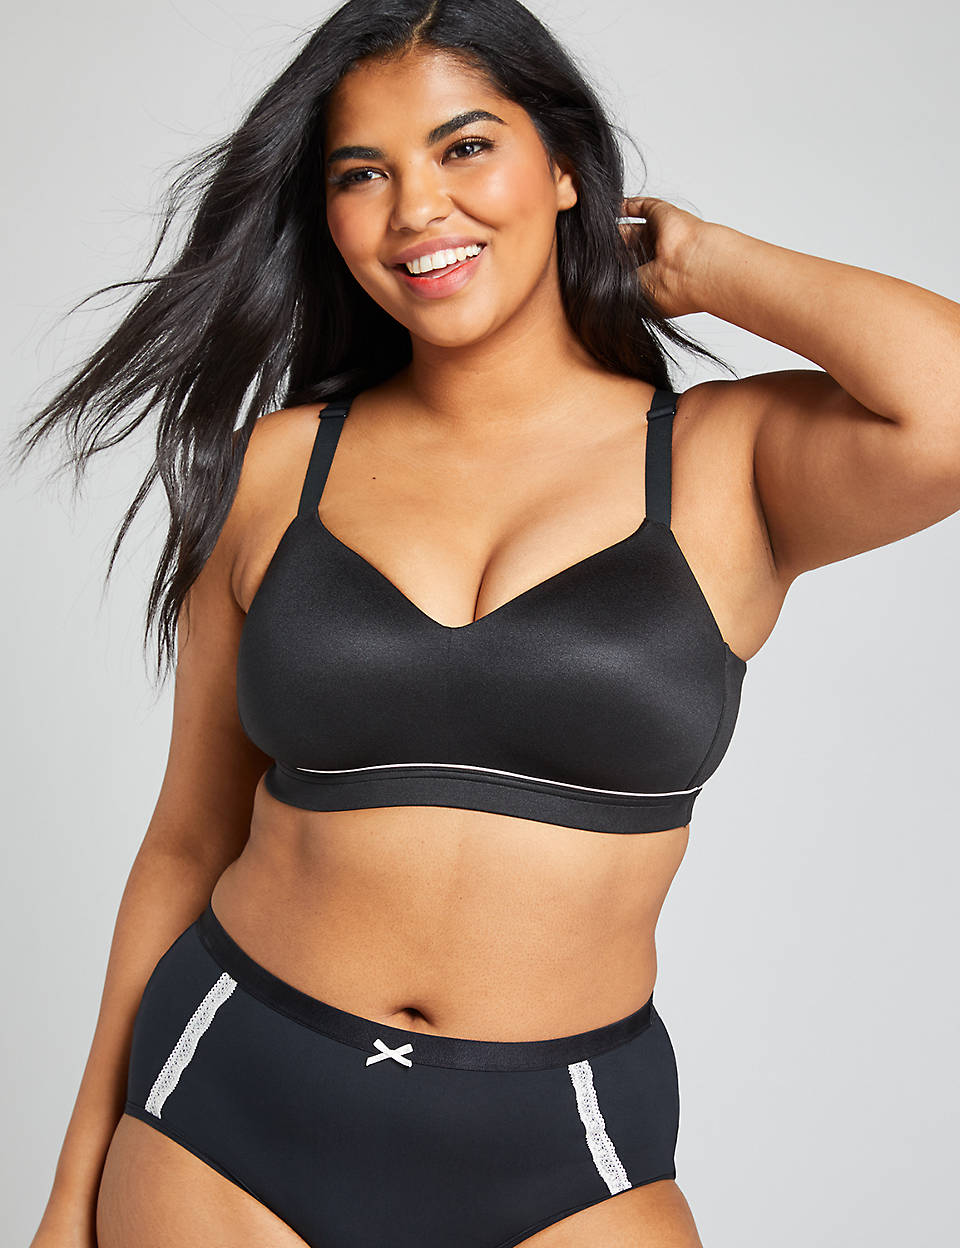 Best Bralettes For Big Busts - D, DD Cup & More